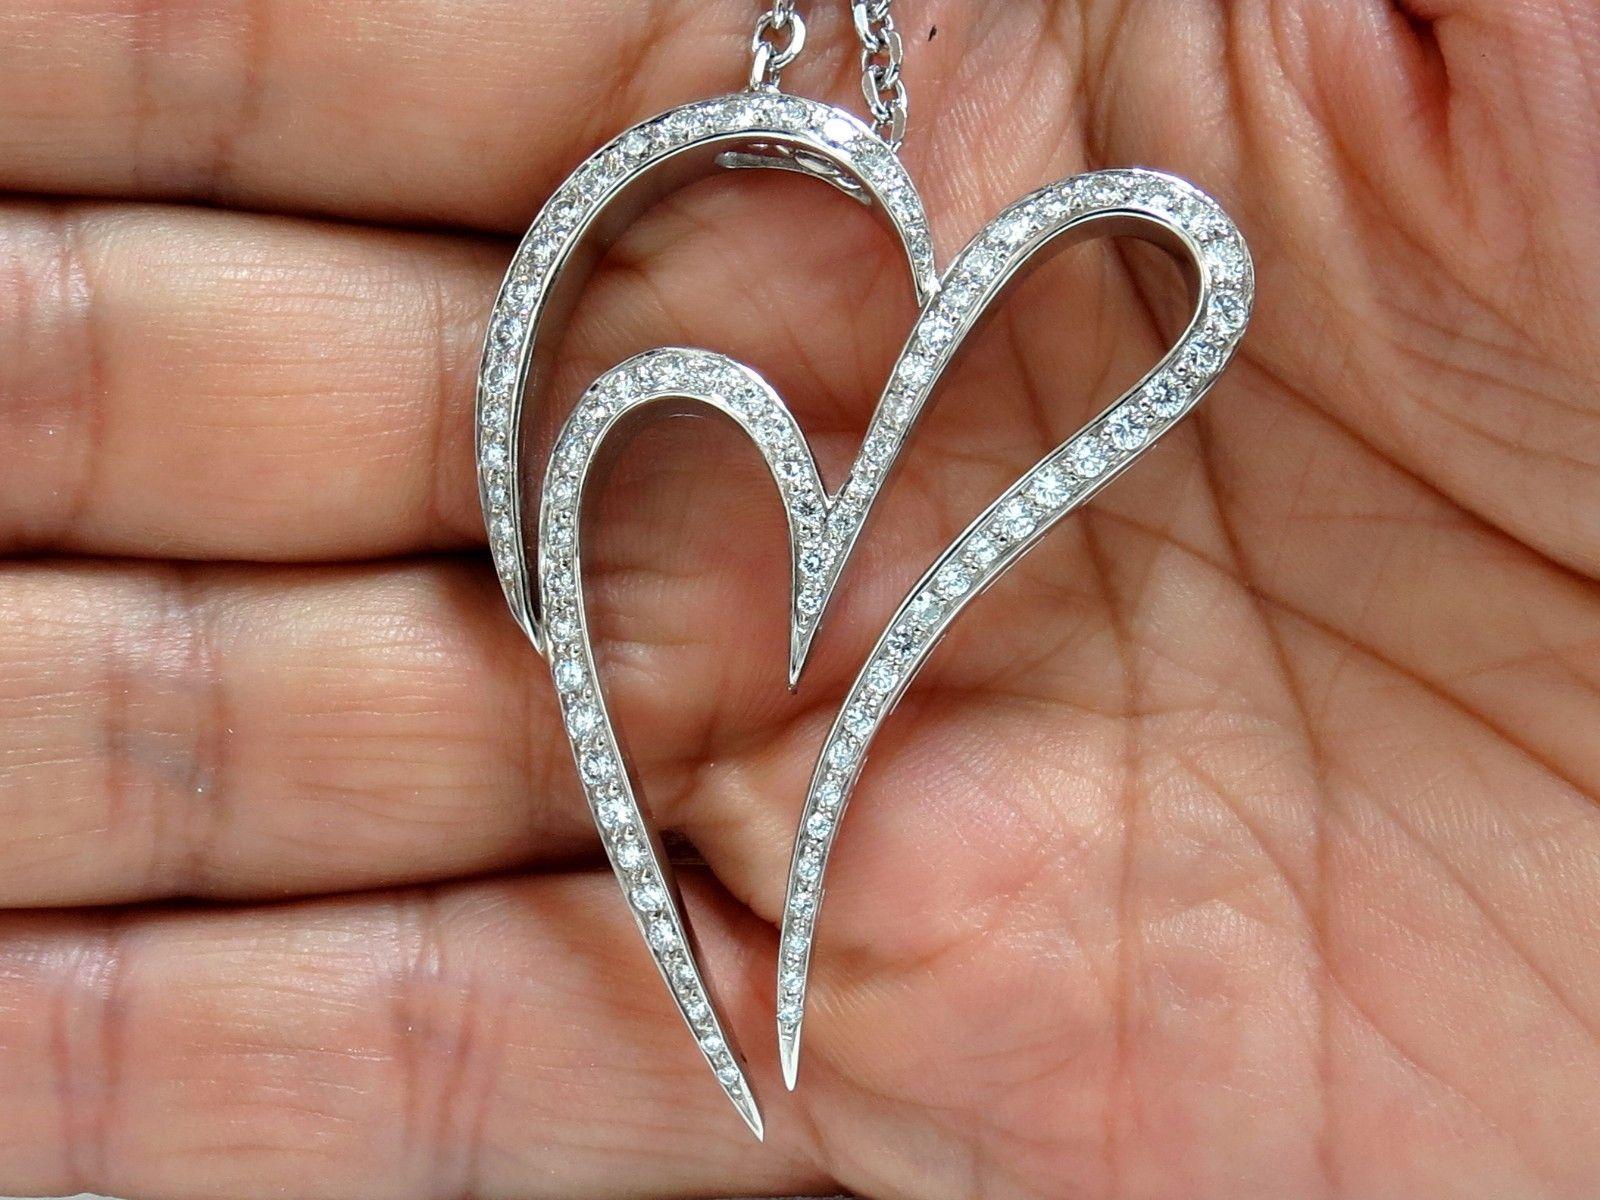 Modern Love

Double Heart Swirl pendant.

3.00ct. Diamonds

Rounds, Full Cut Brilliants

 G-color Vs-2 clarity 

French pave Bead set.

Substantial sized. 


50.00mm long / 1.97 inches
40.00mm diameter /1.57 inches

4.79 mm thick.

Gorgeous 14kt.